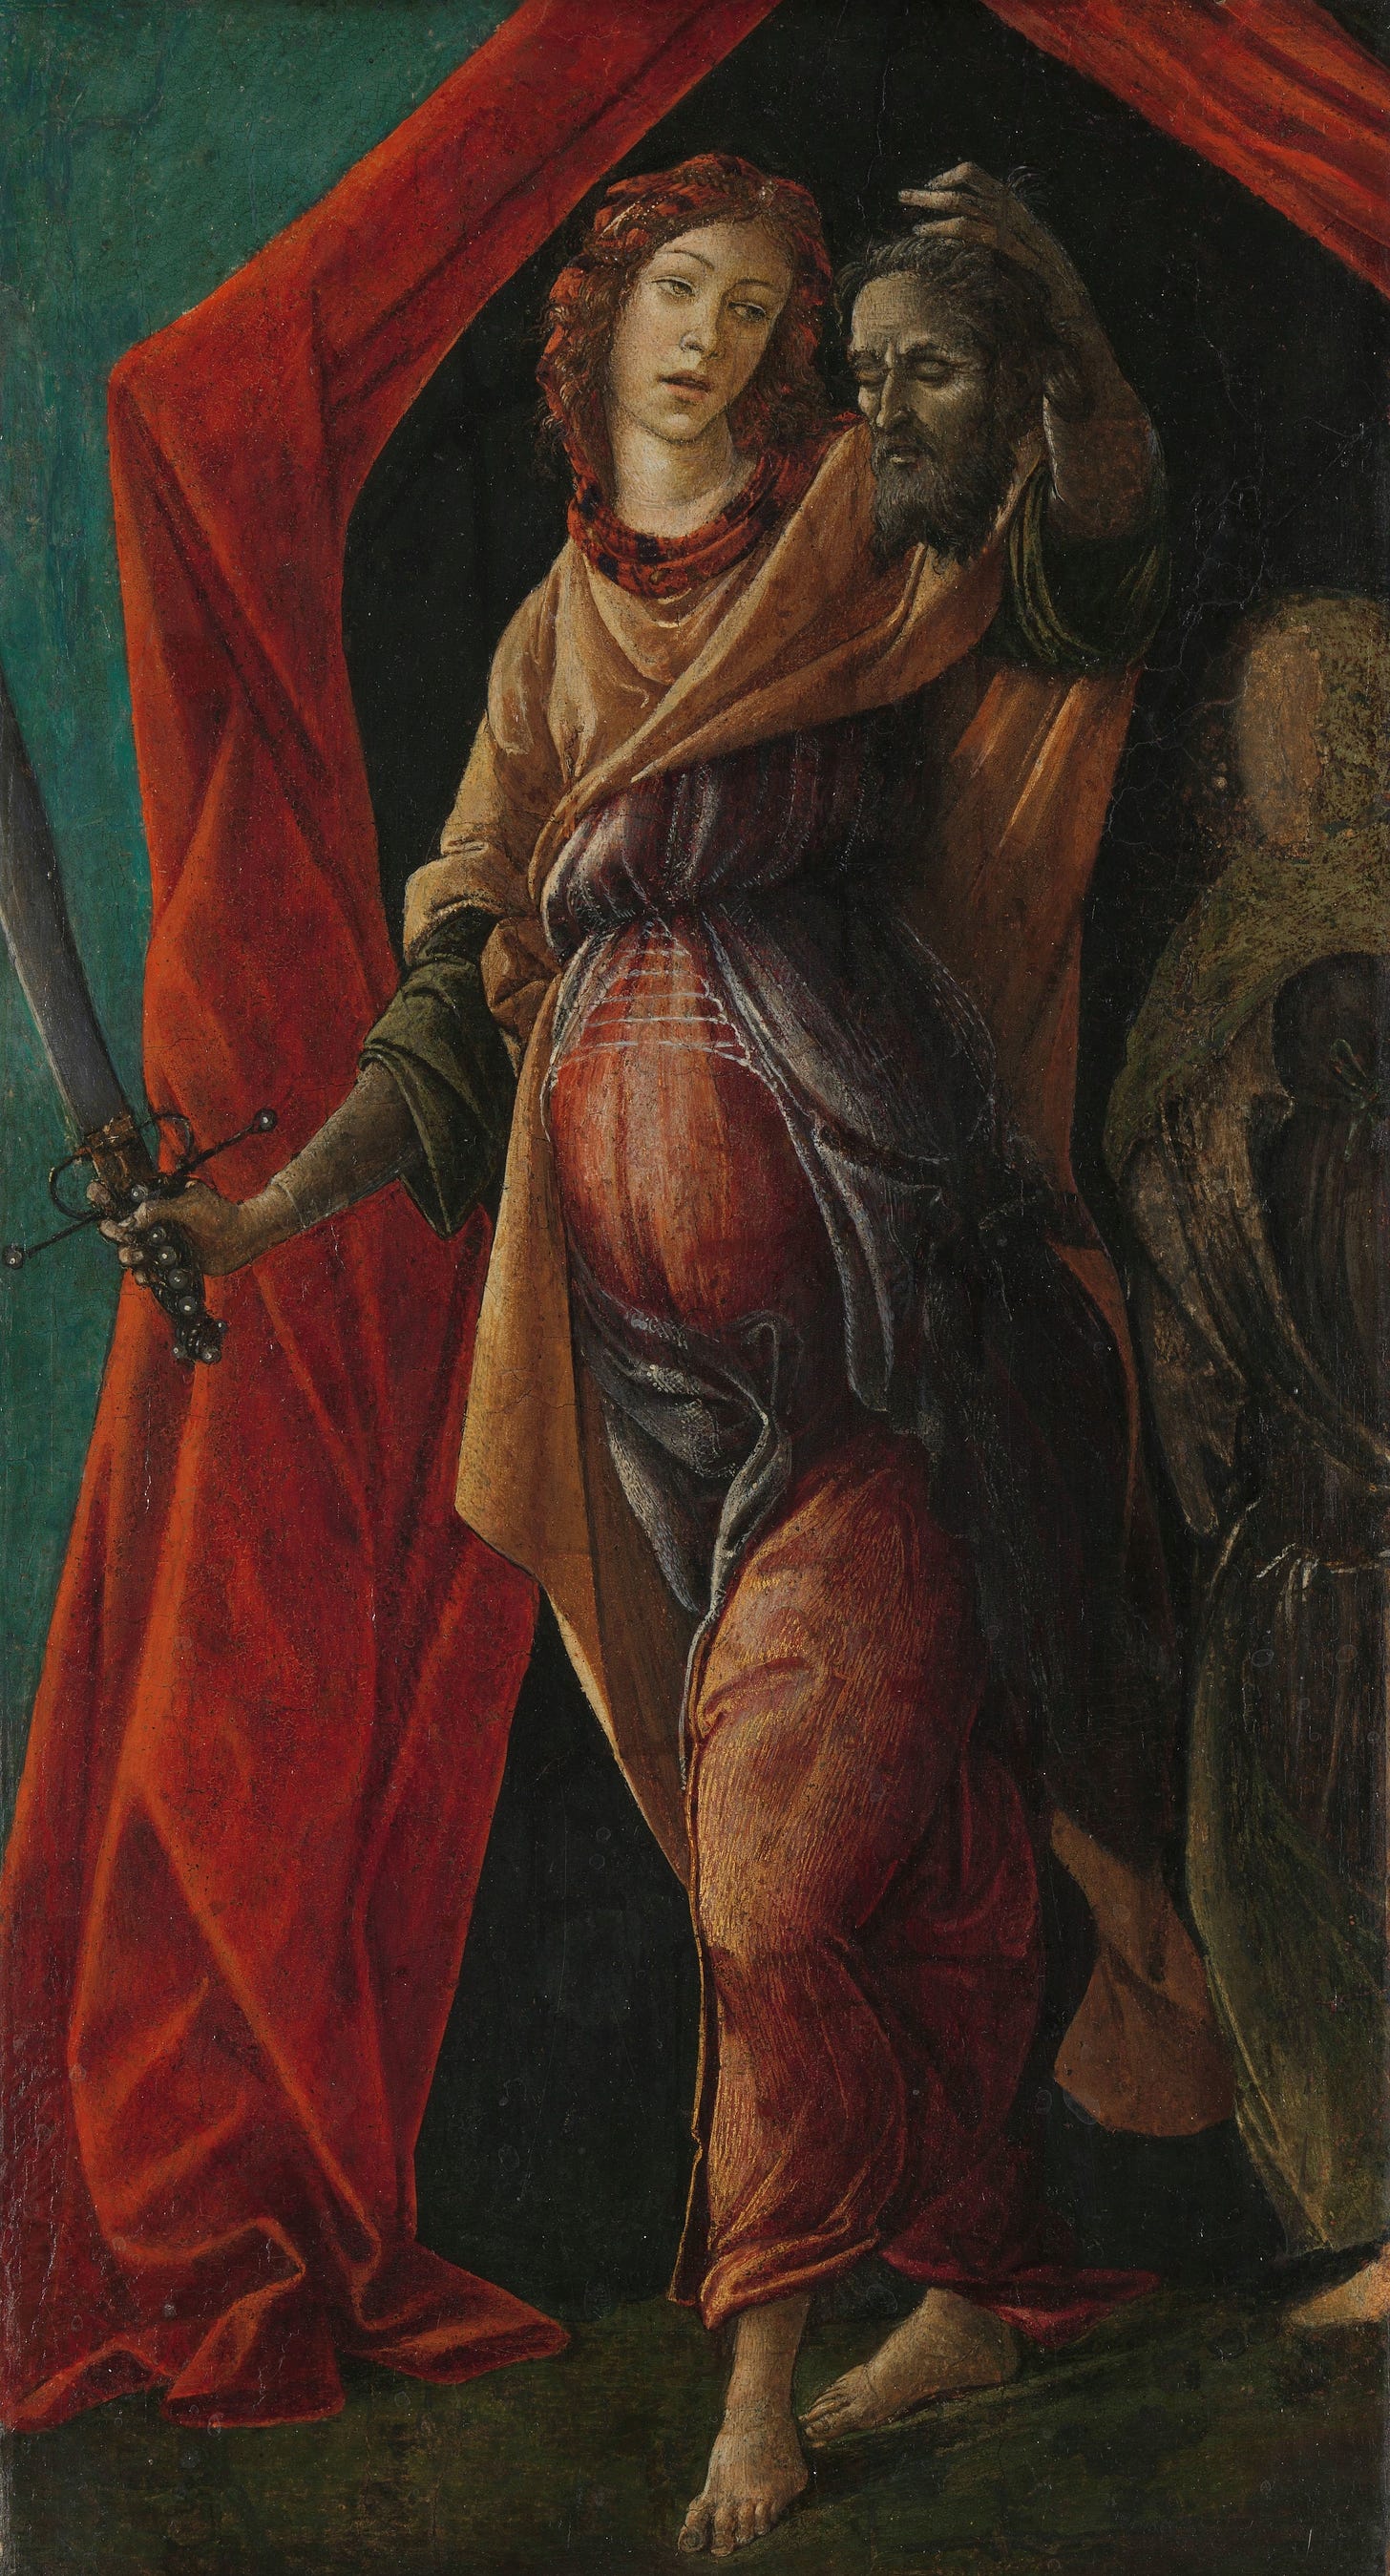 Judith with the Head of Holofernes (c. 1497 - c. 1500)